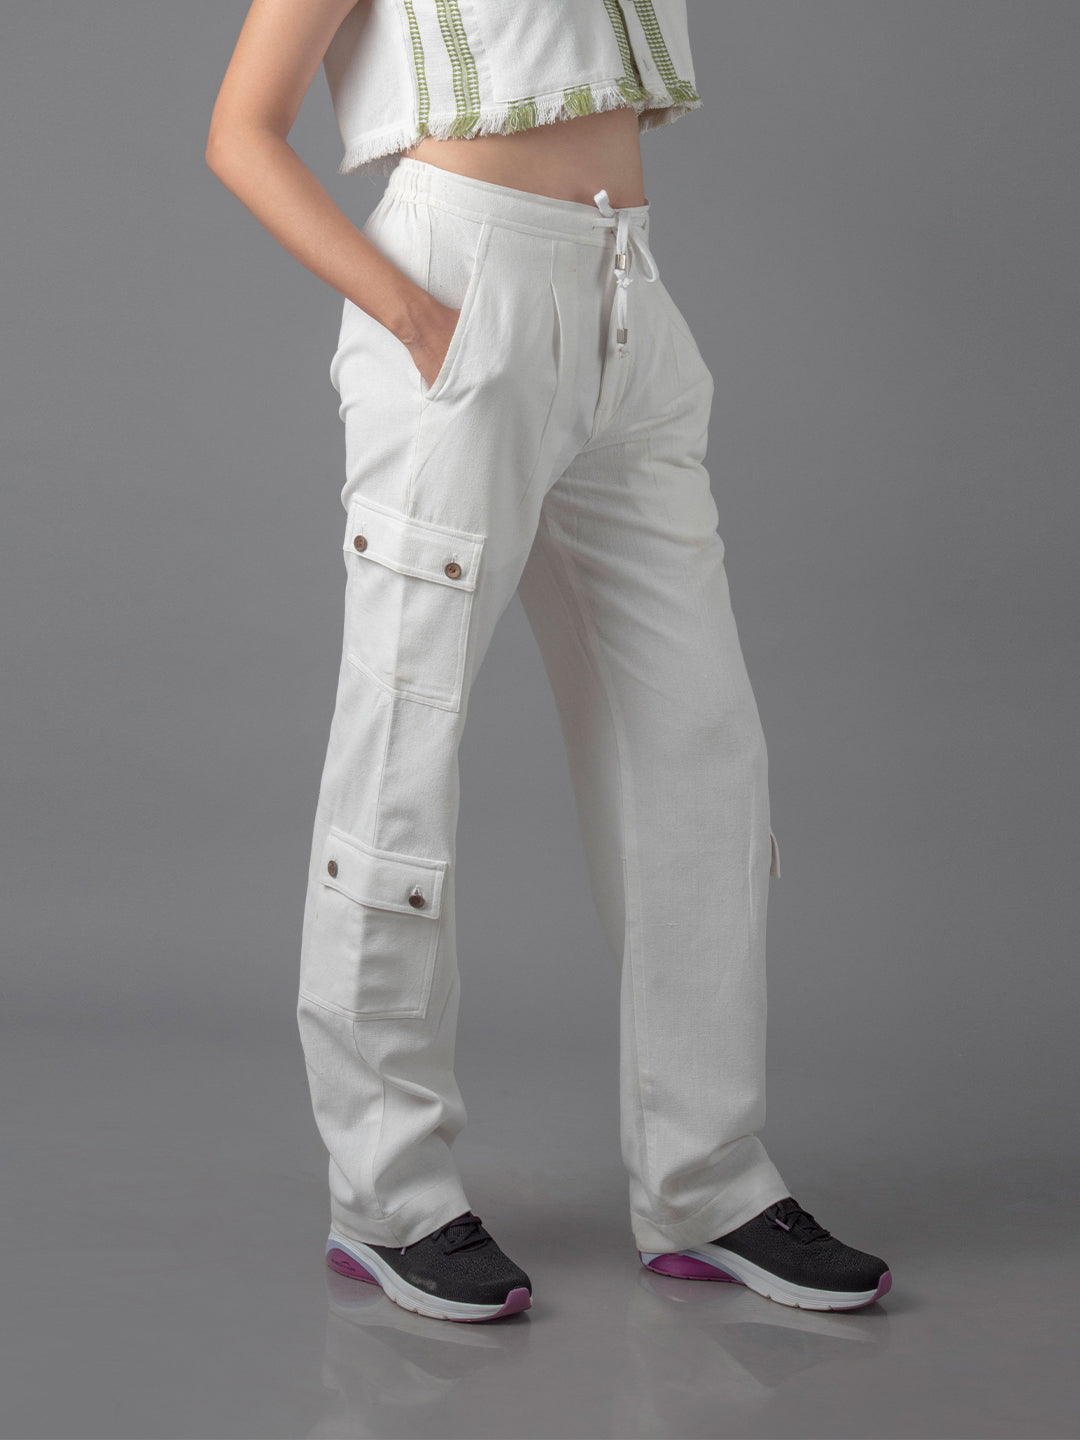 3 outfit ideas for cargo pants 👖 | Gallery posted by laurenvacula | Lemon8